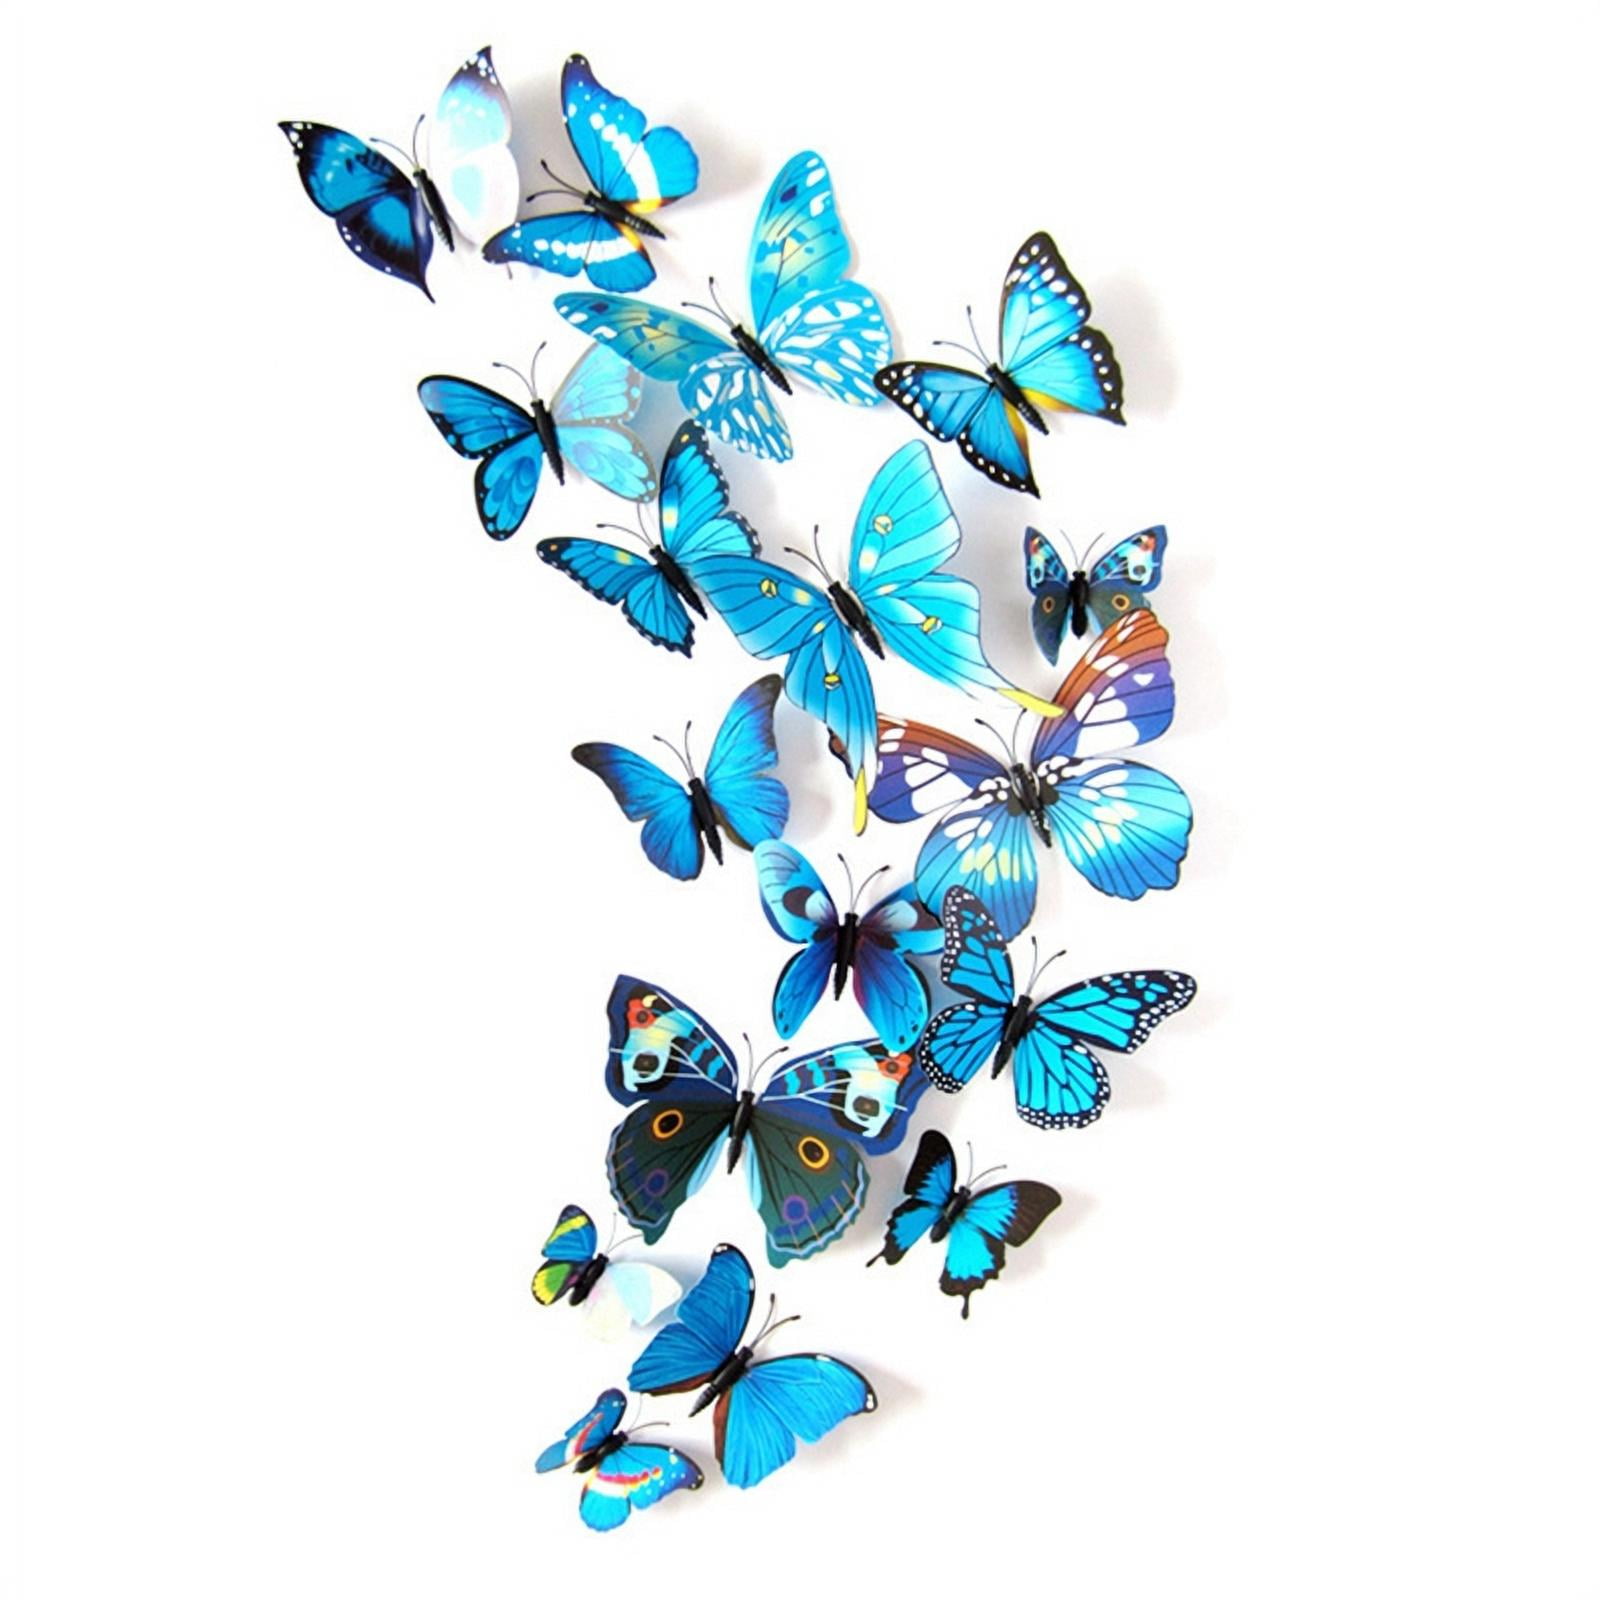 3D Magnet Wall Decor Butterfly at Rs 80/piece, Faridabad